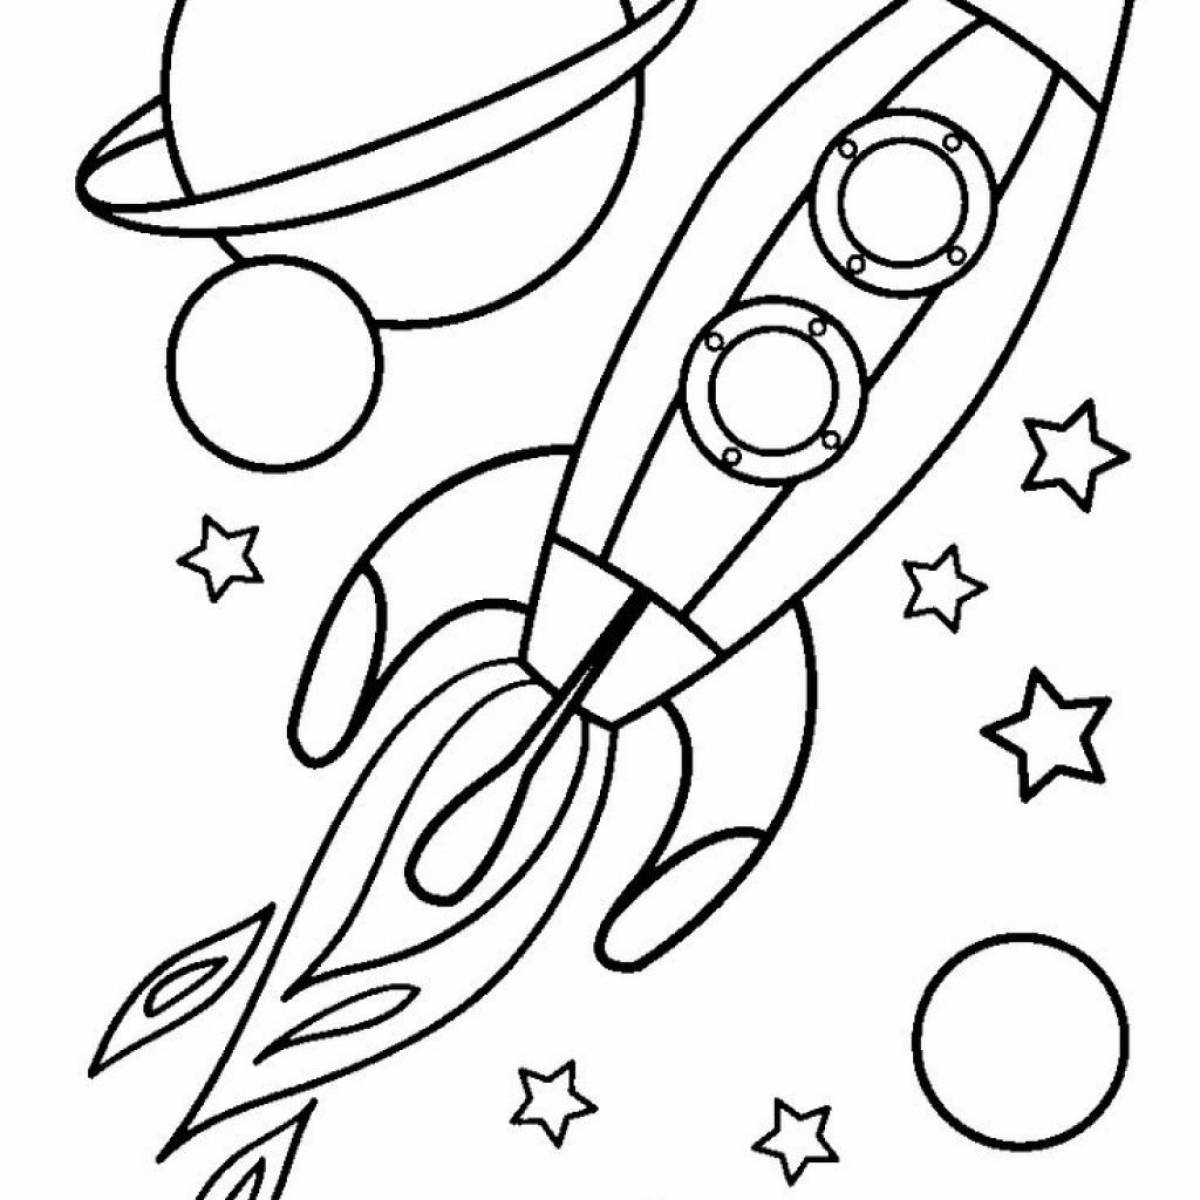 Incredible space exploration coloring book for 4-5 year olds